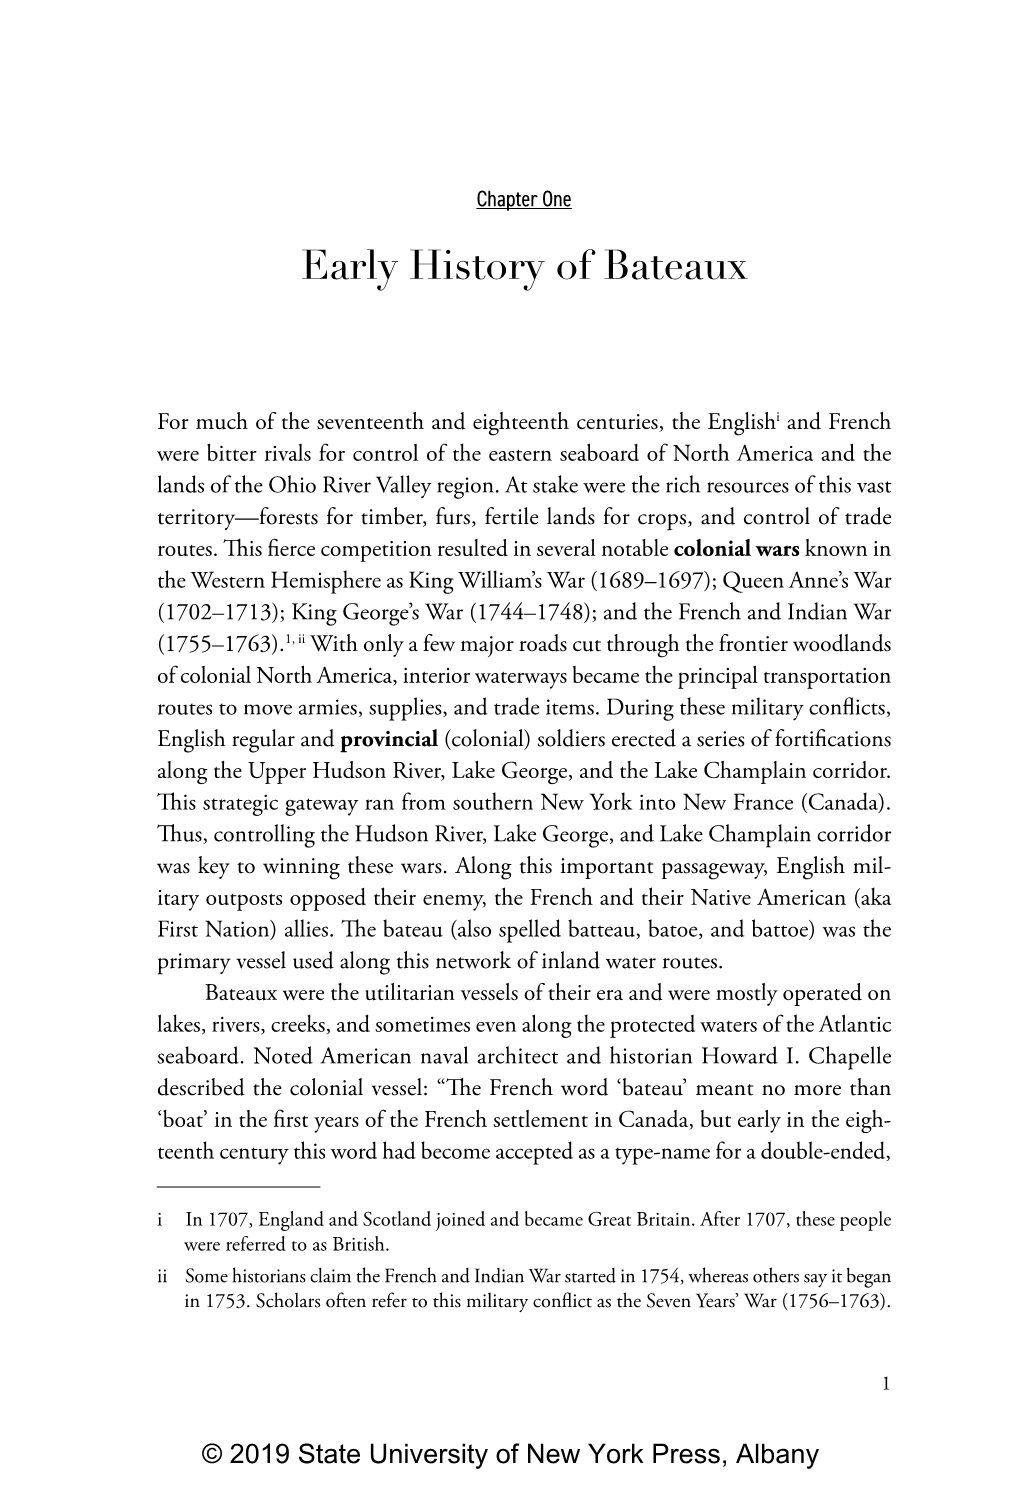 Early History of Bateaux